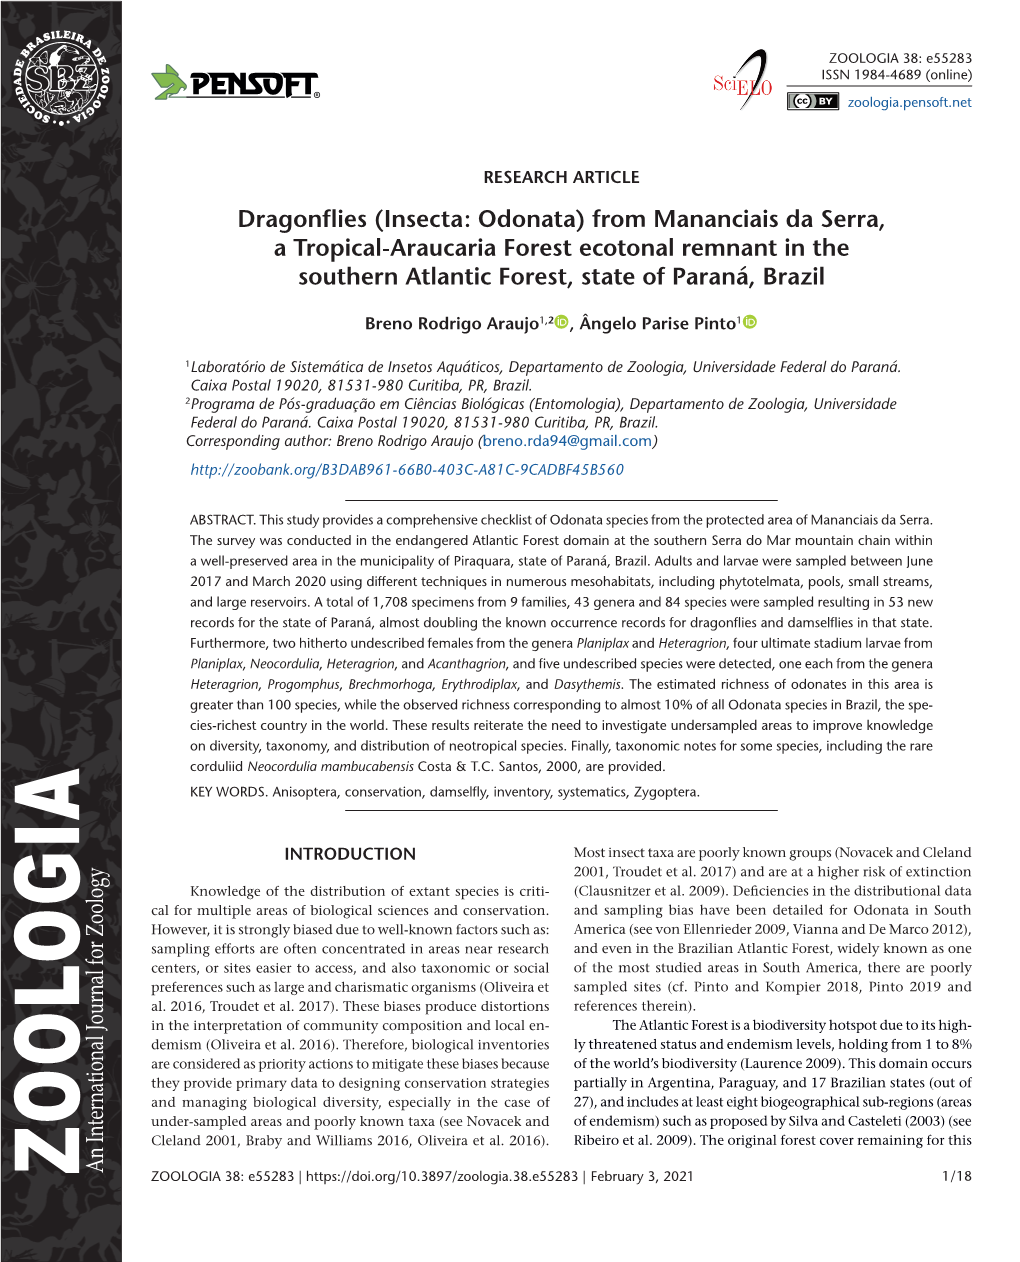 Dragonflies (Insecta: Odonata) from Mananciais Da Serra, a Tropical-Araucaria Forest Ecotonal Remnant in the Southern Atlantic Forest, State of Paraná, Brazil